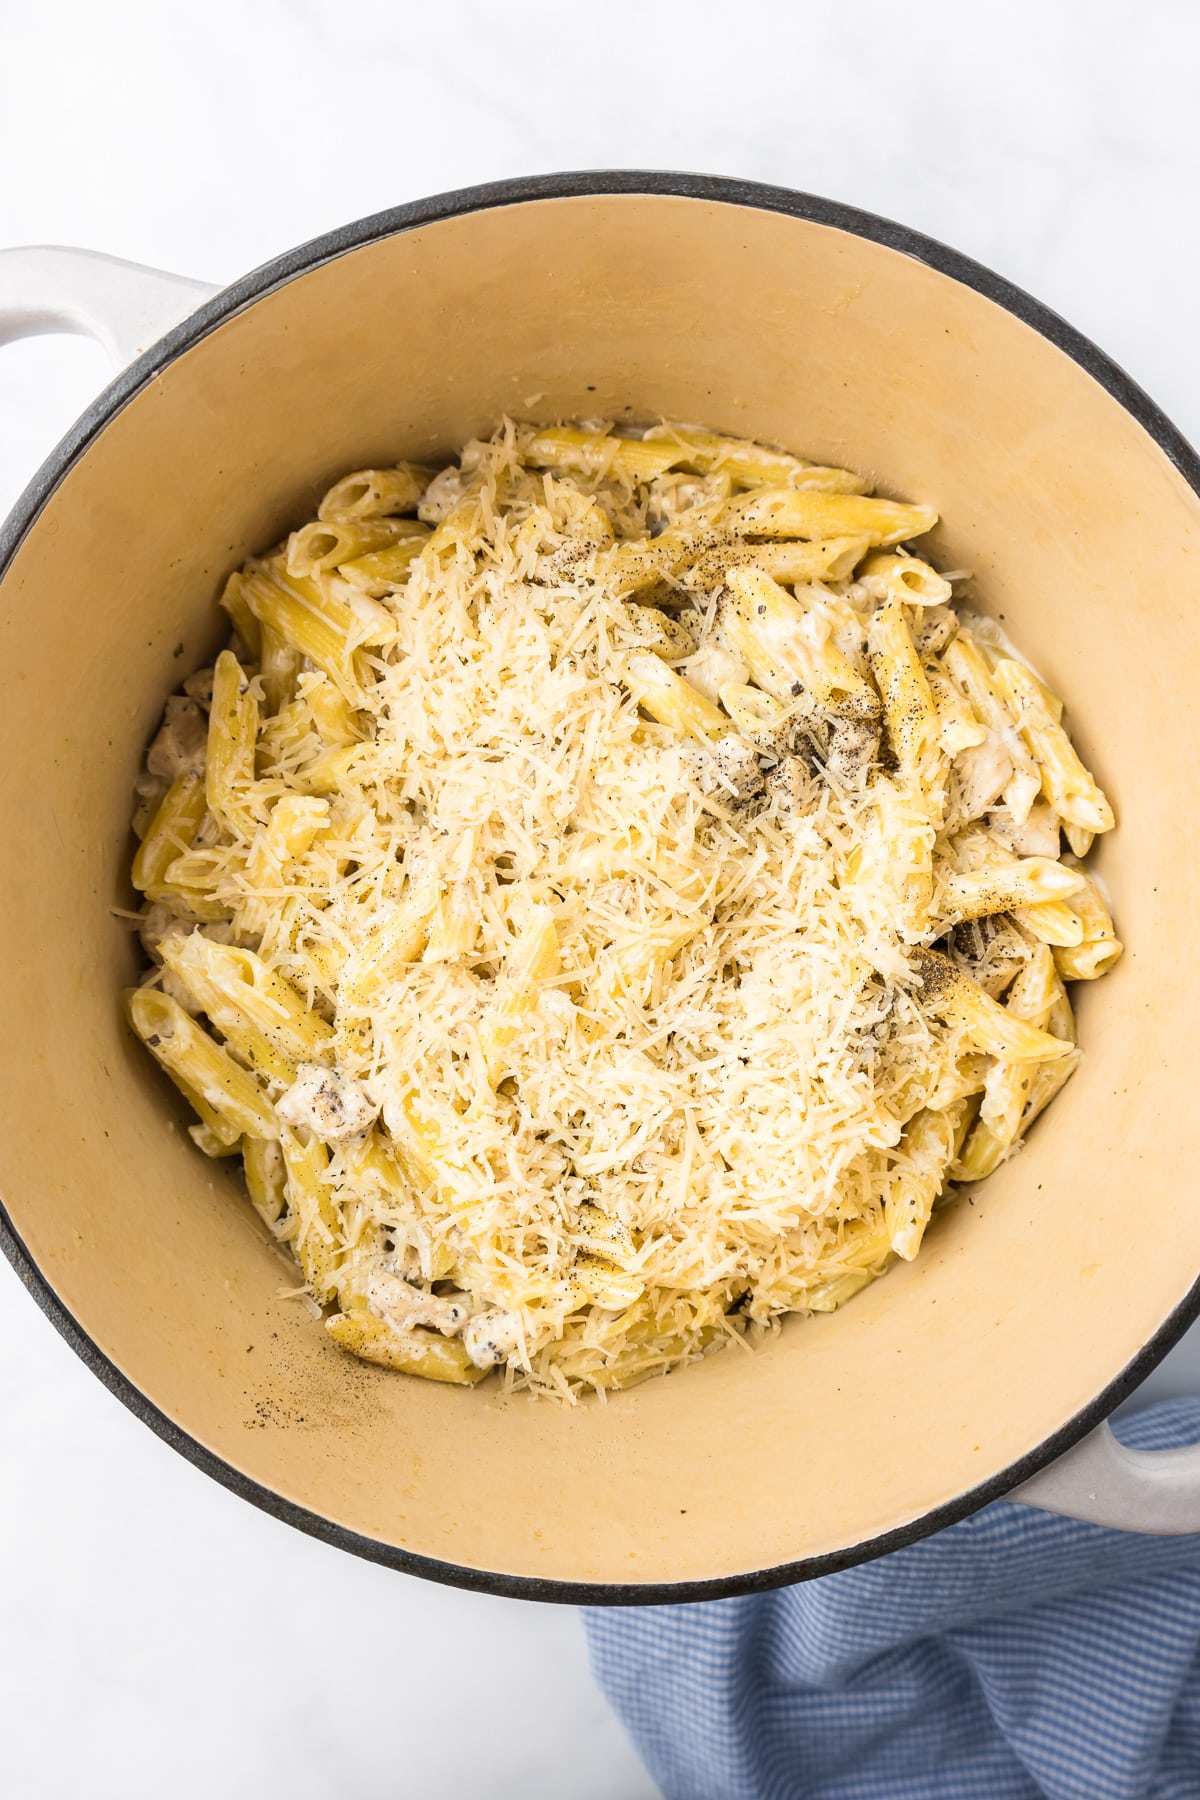 Mixing alfredo sauce and cheese into penne pasta in a pot from above.